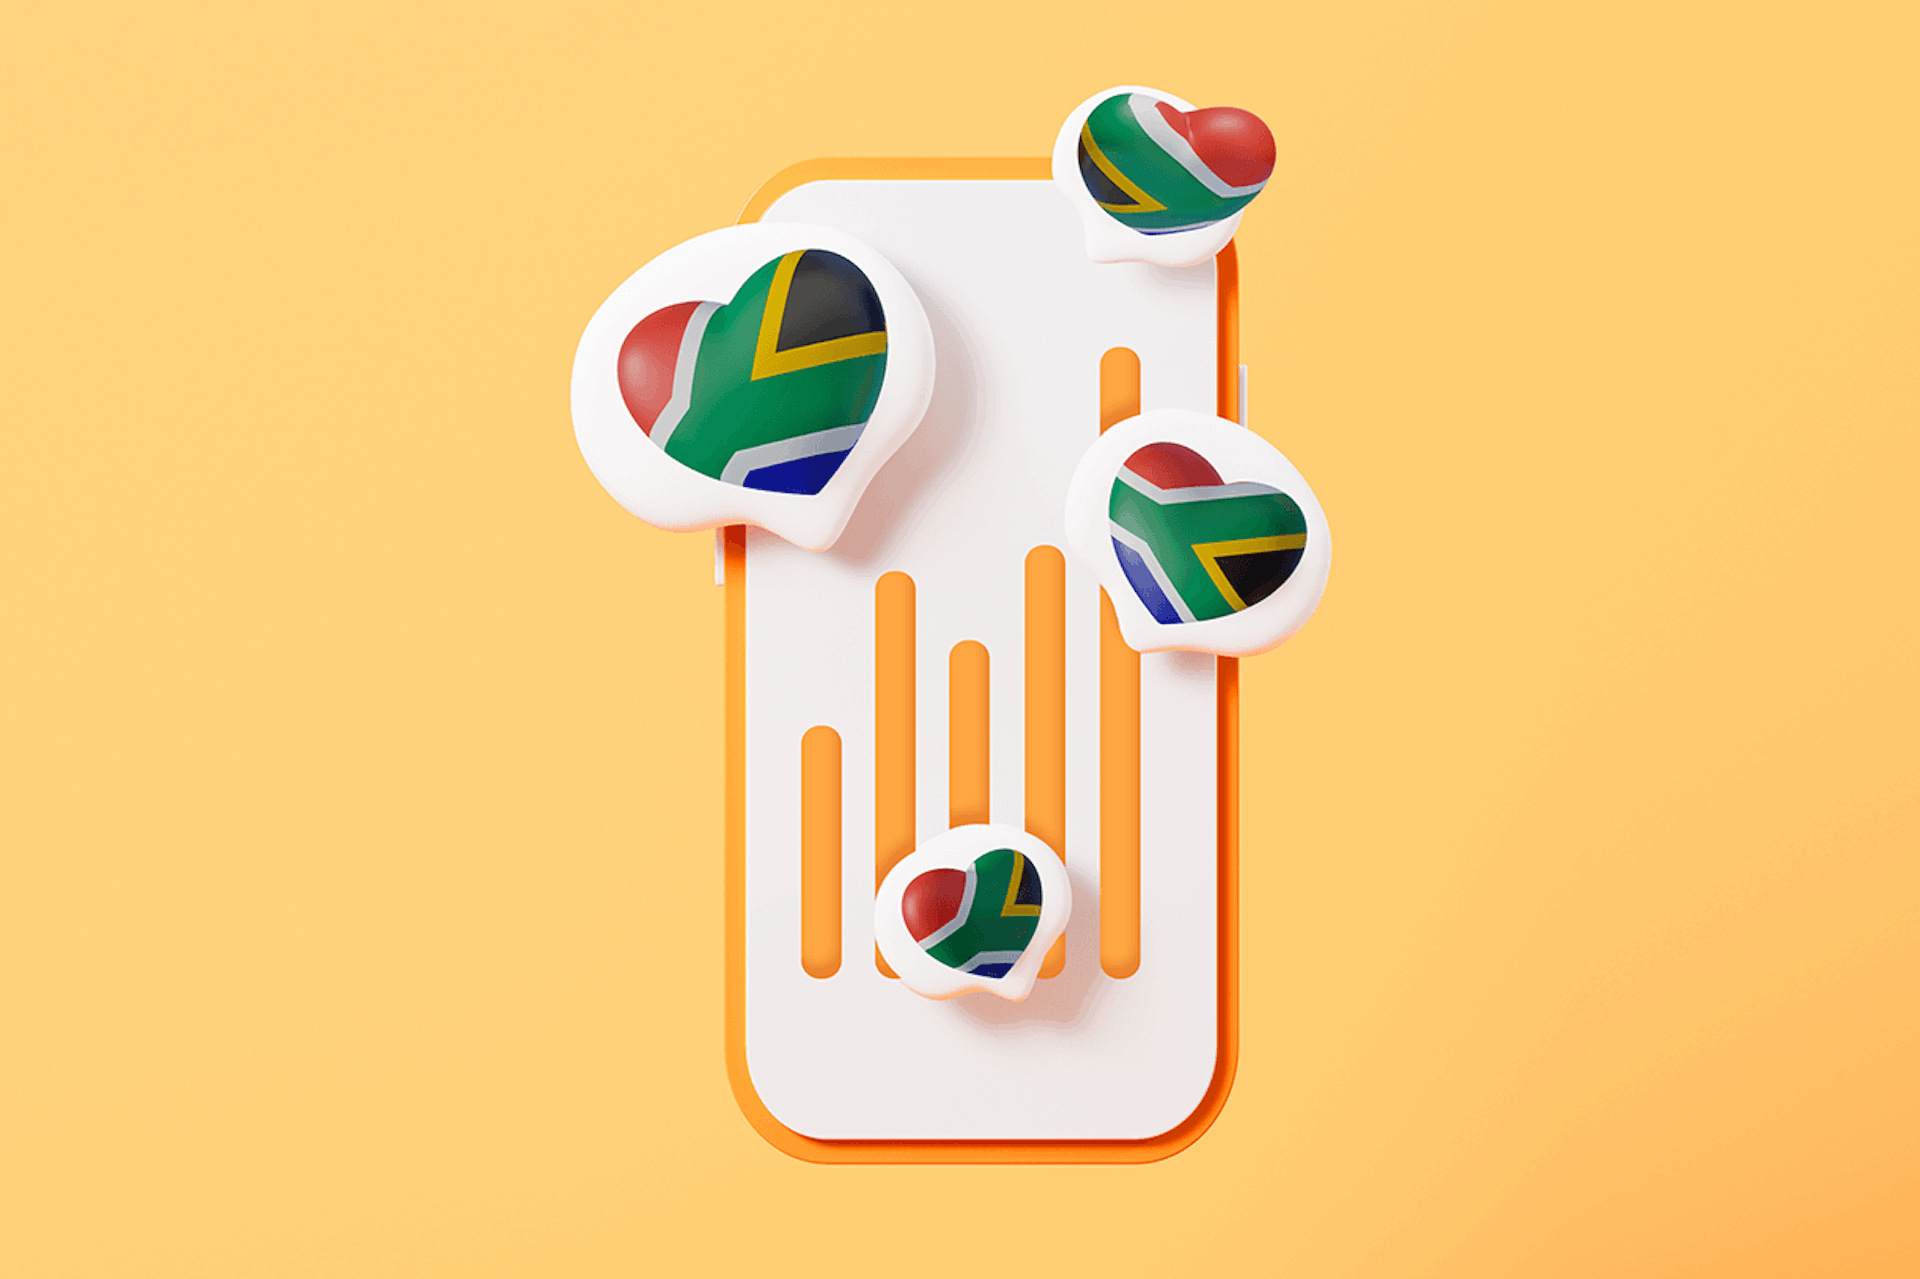 3D Illustration of South African social media statistics on a phone